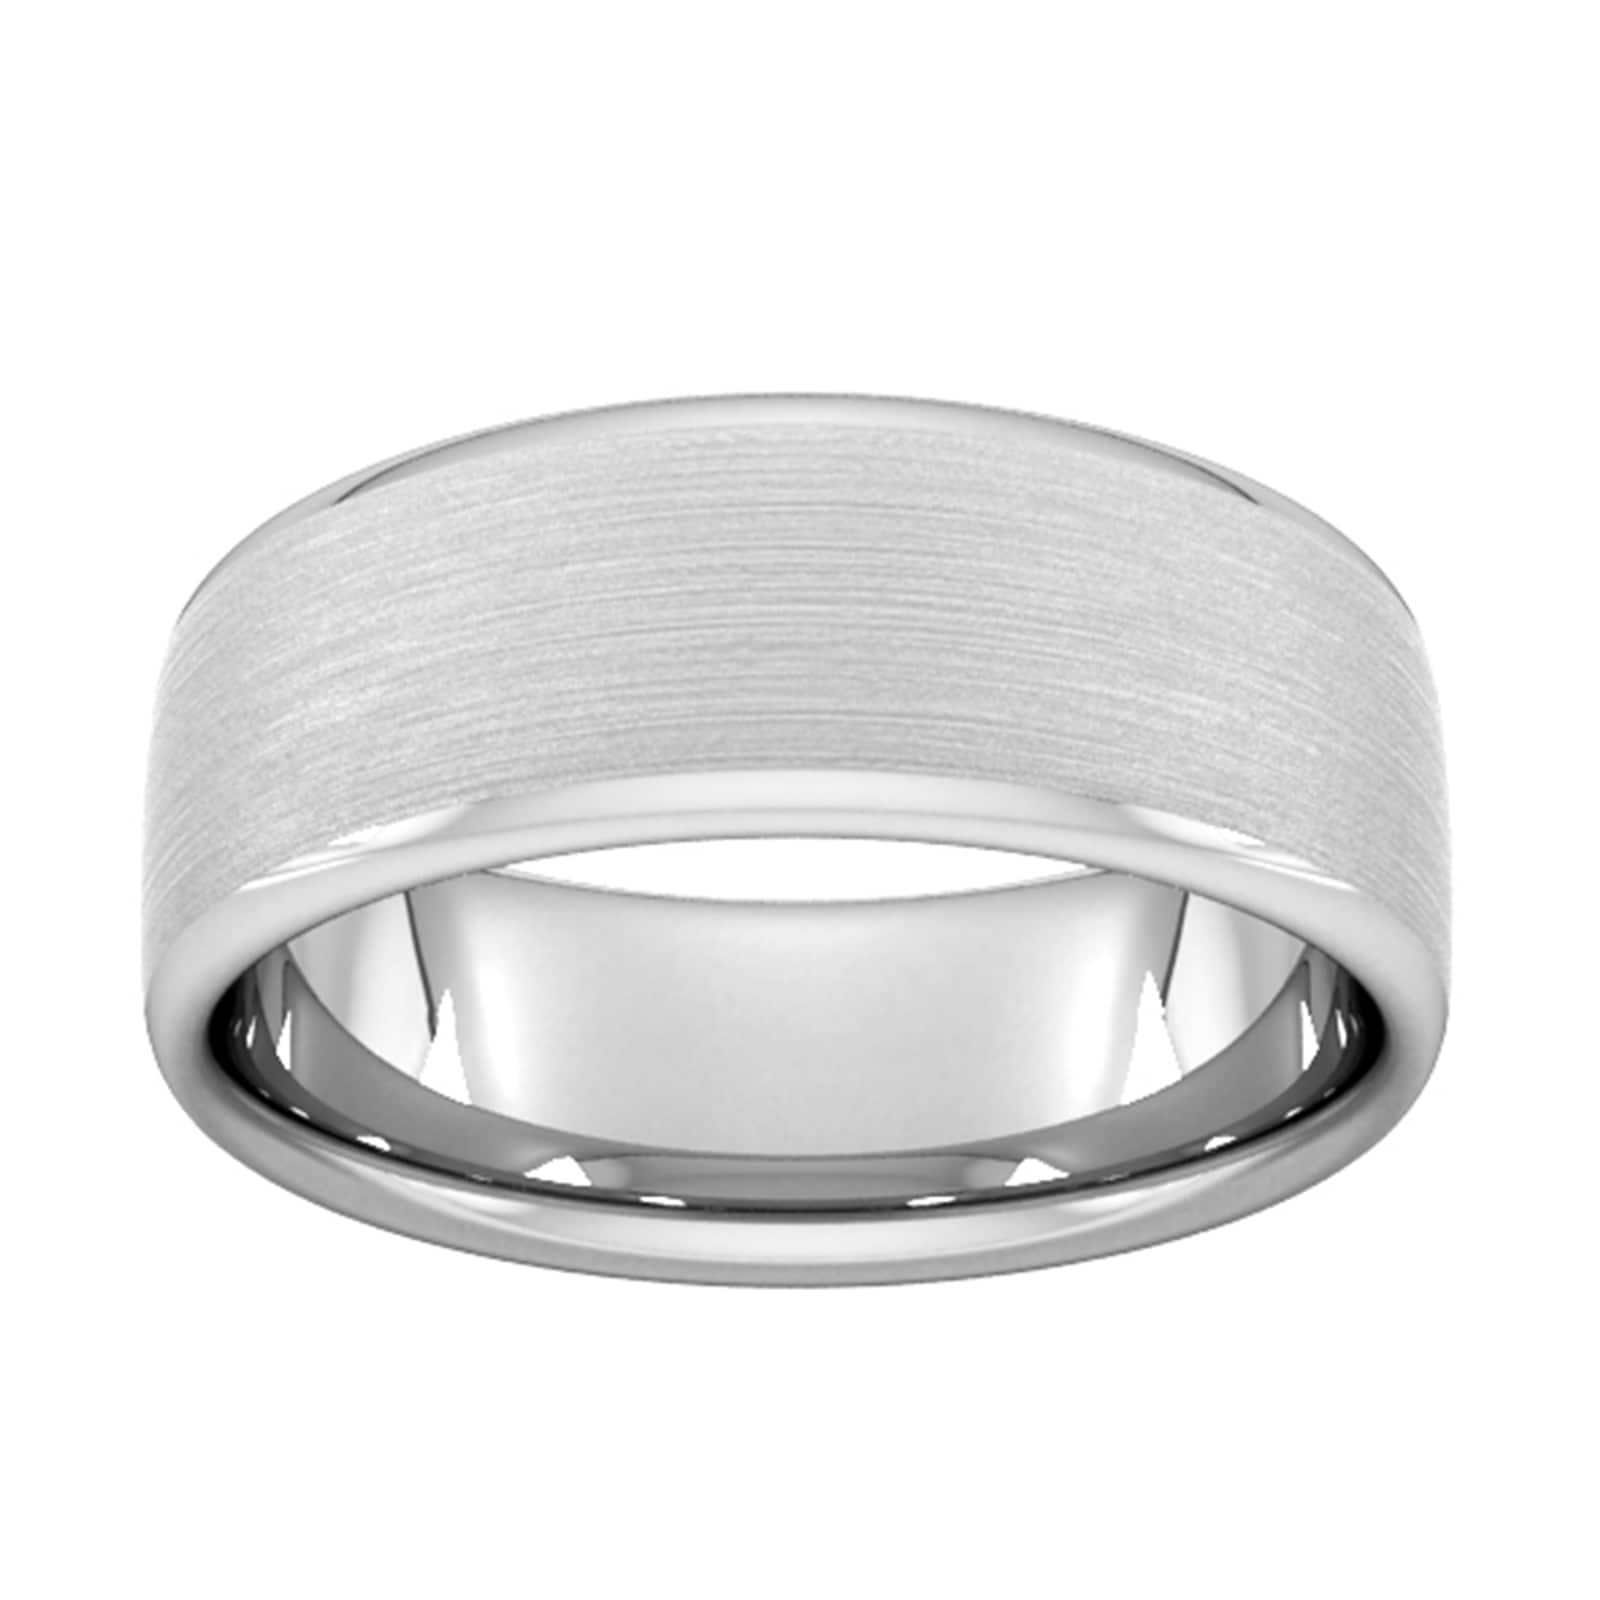 8mm Traditional Court Heavy Matt Finished Wedding Ring In Platinum - Ring Size P